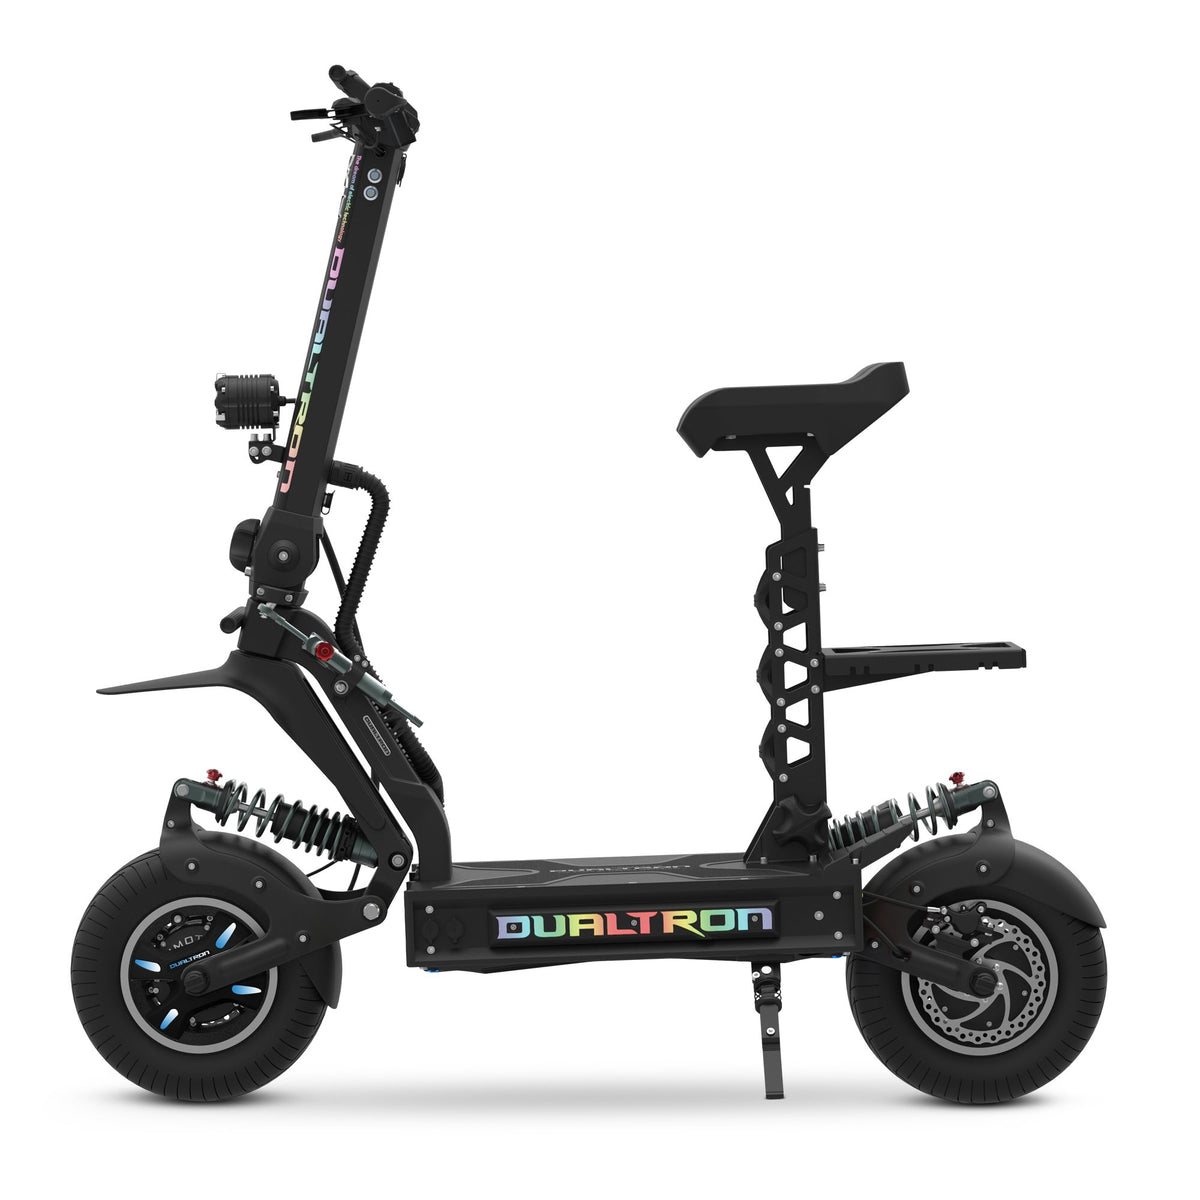 Dualtron X2 electric scooter side view